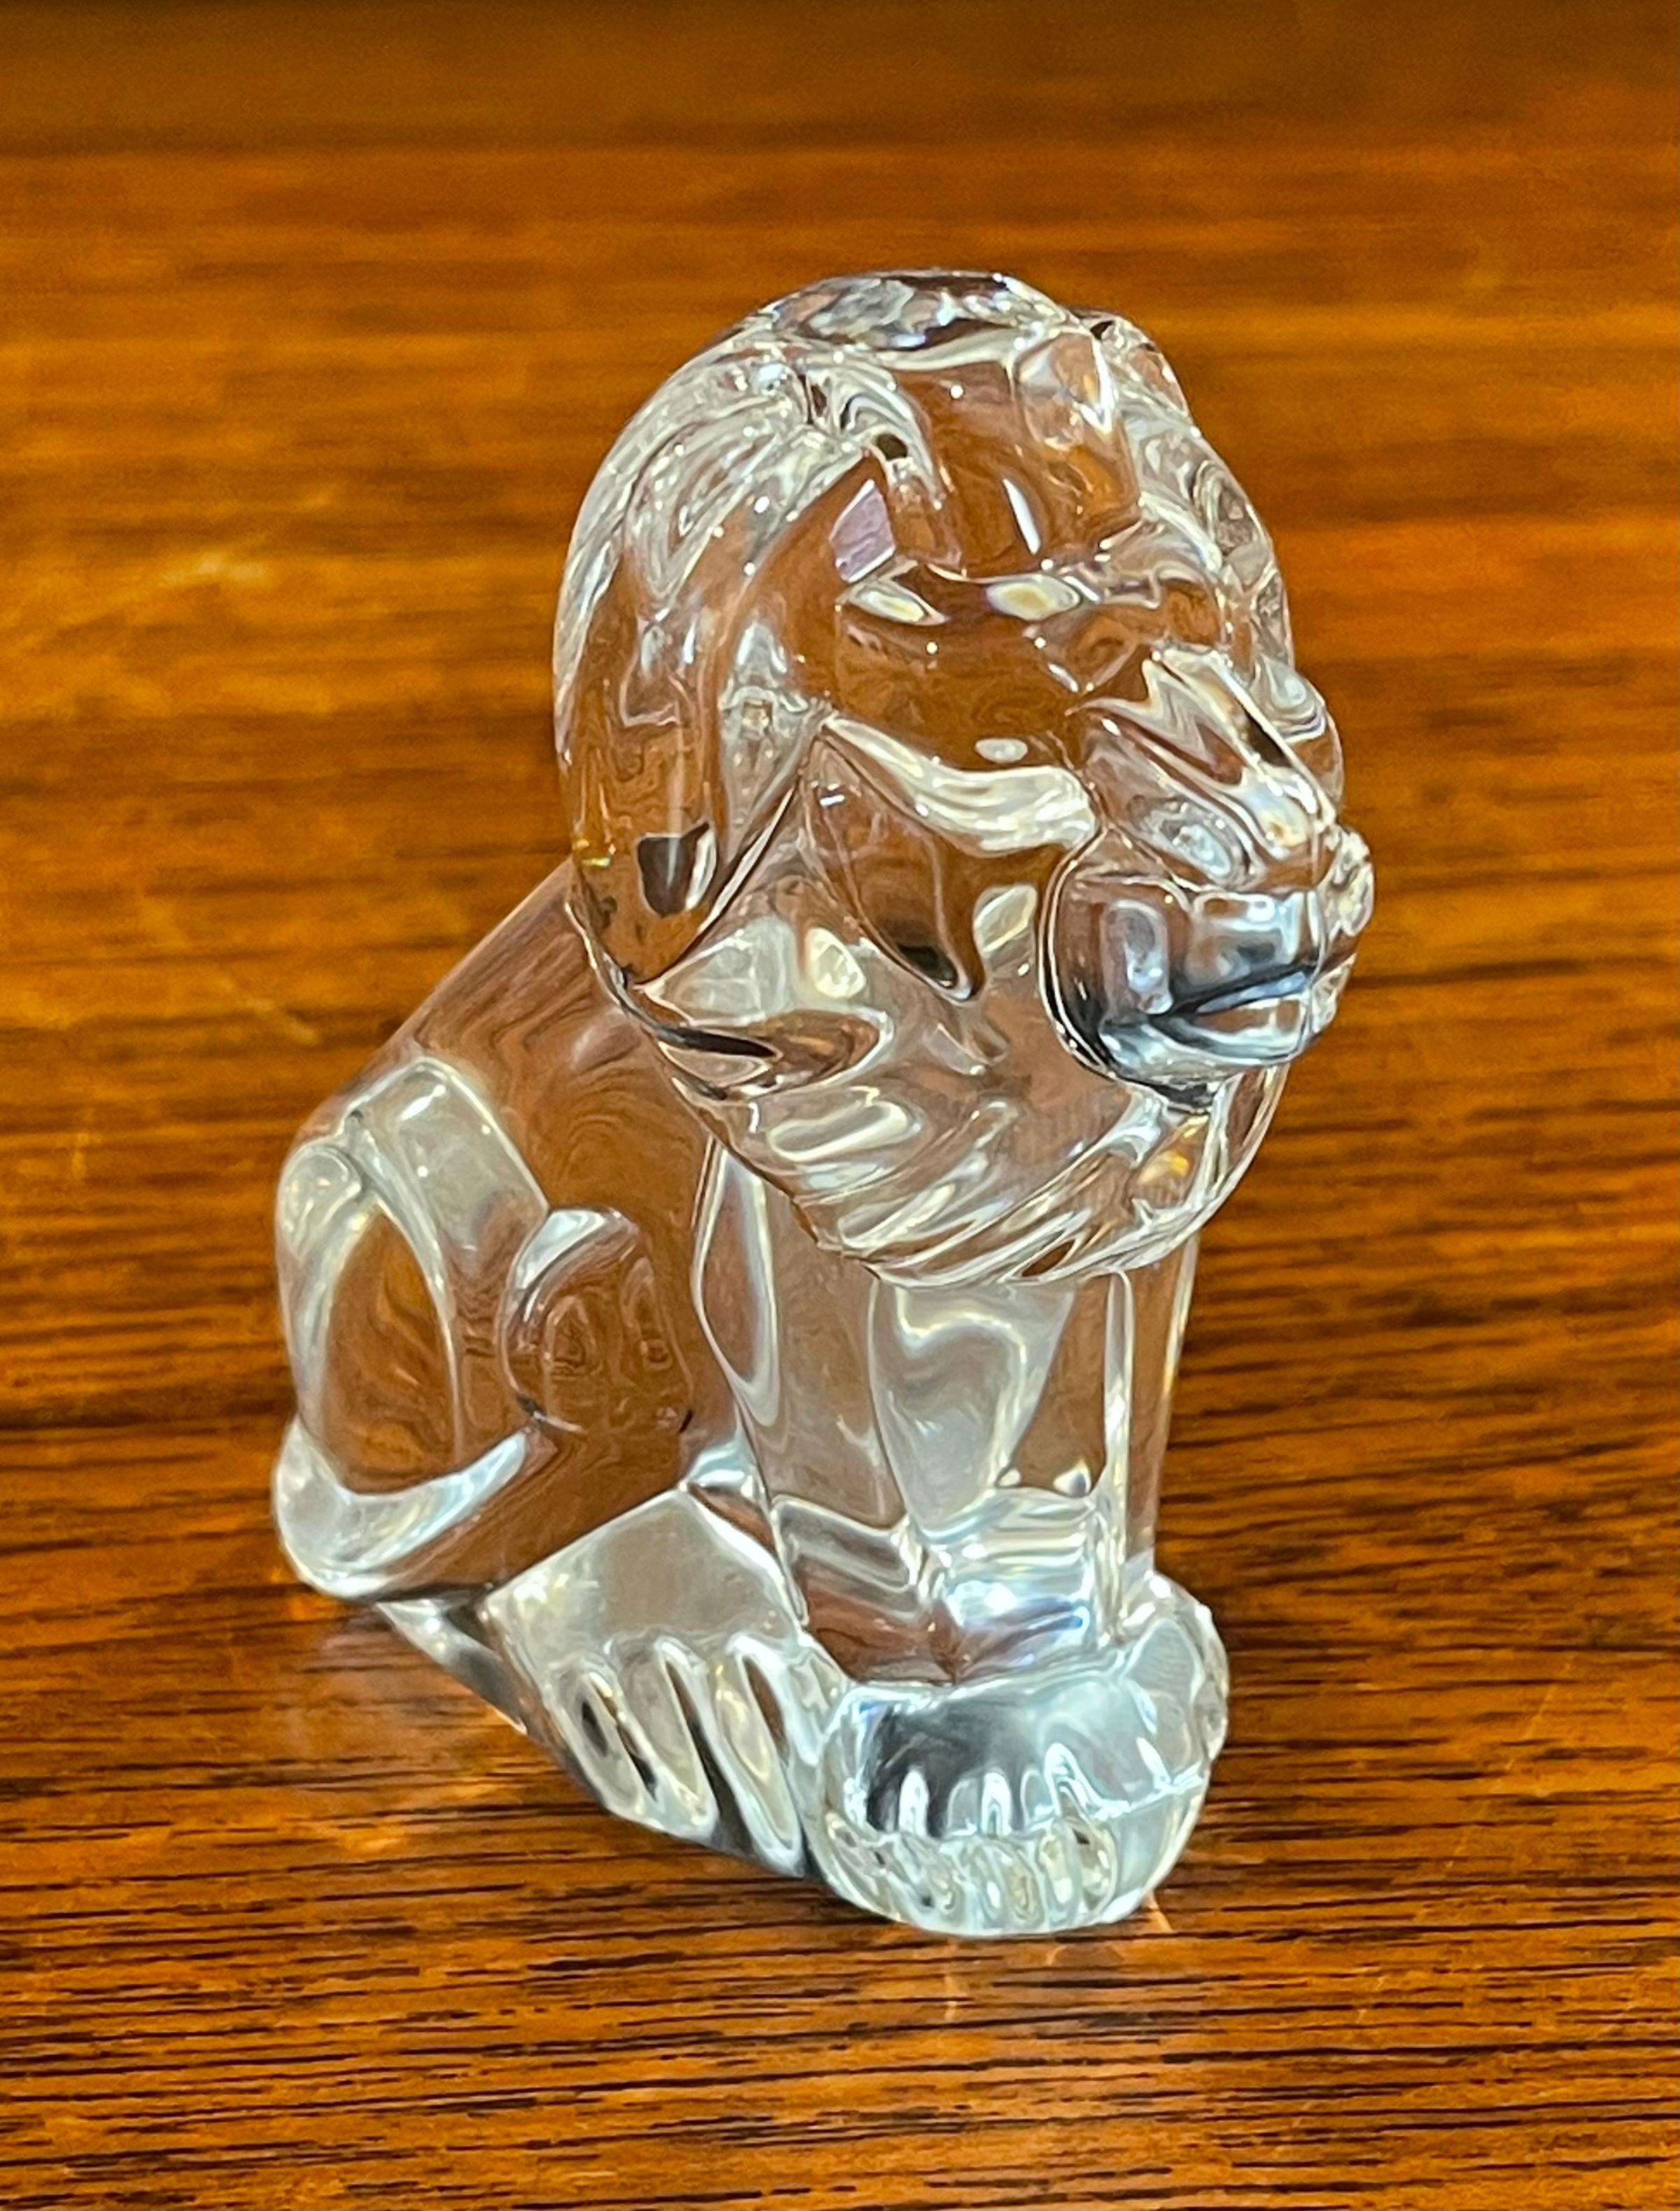 A rare crystal lion paperweight / hand cooler by Tal Lebel Schaefer for Steuben Glassworks, circa 2000s. The piece is in very good condition with no chips or cracks and measure 1.25